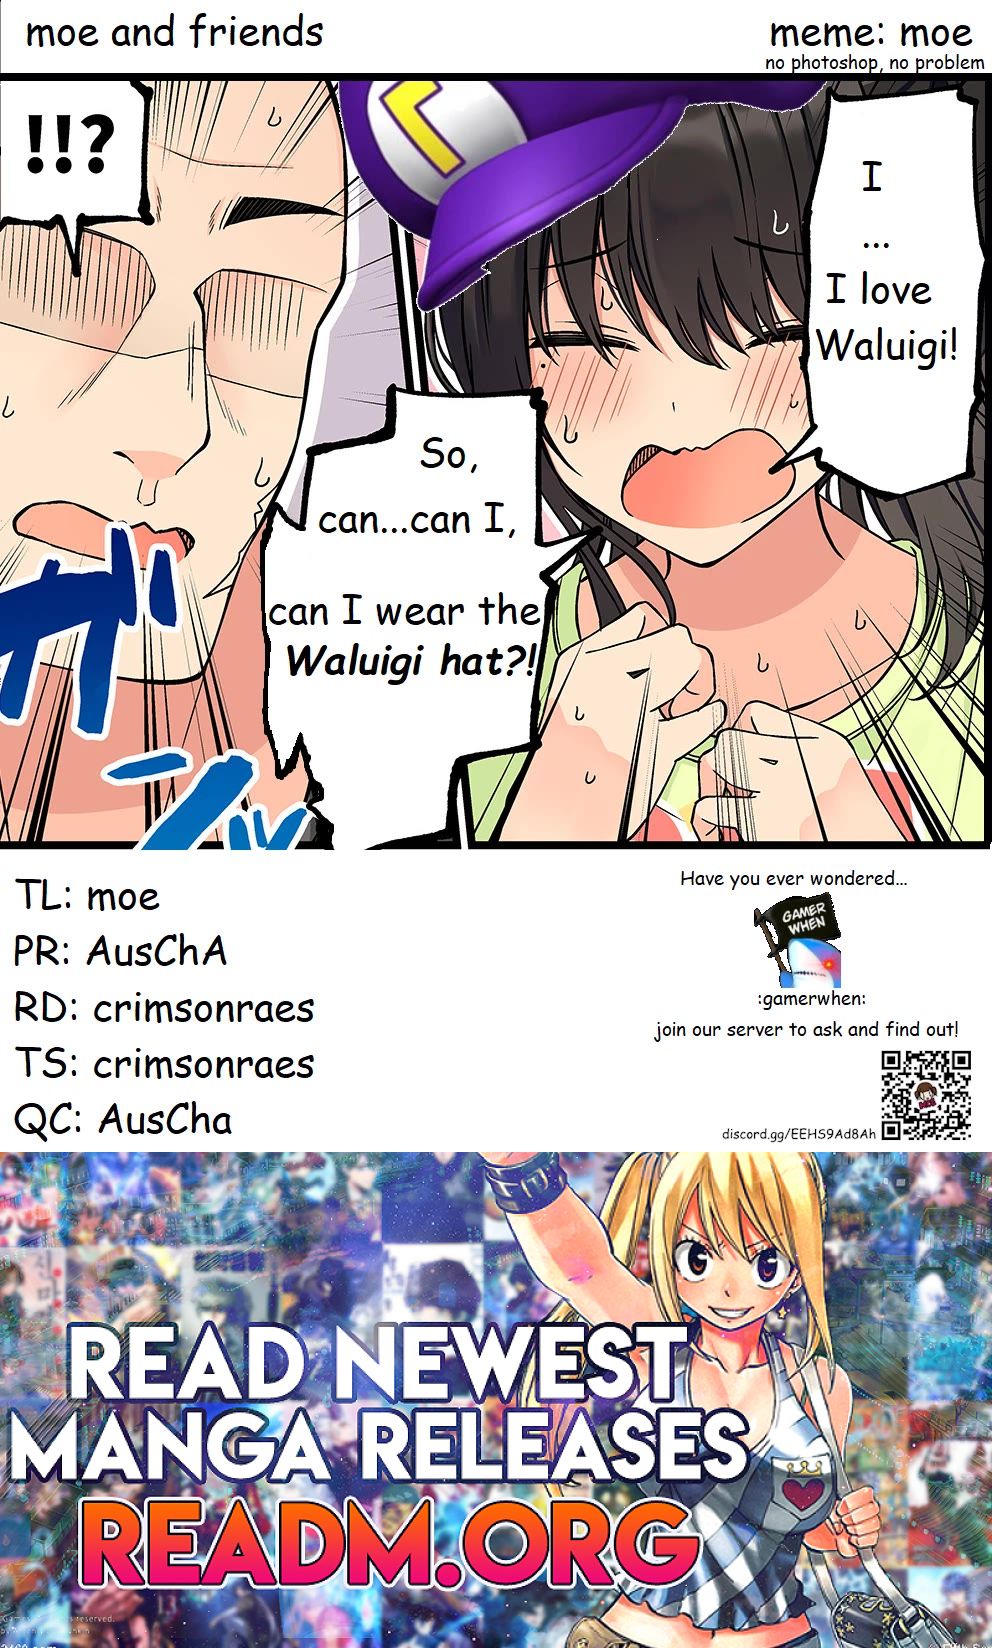 Hanging Out with a Gamer Girl Chapter 187